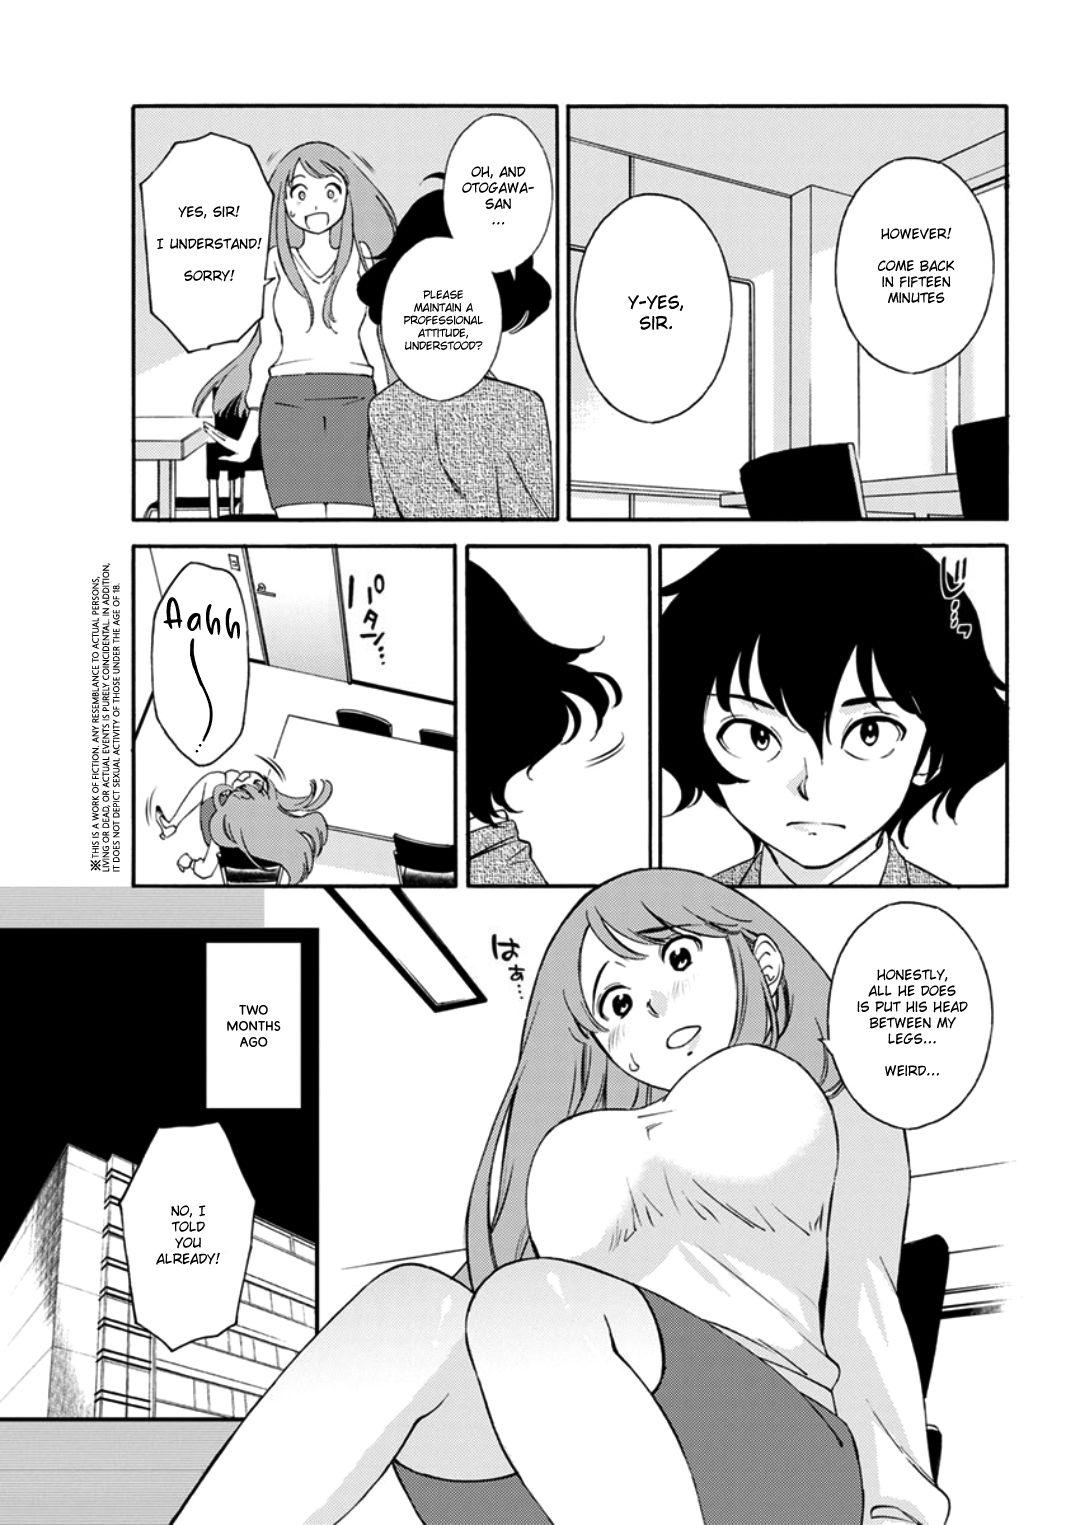 Putita [Mikihime] Otogawa-san to Hasamare Kachou | Otogawa-san and The Manager between Her thighs (Action Pizazz DX 2019-05) [English] [Coffedrug] [Digital] Bed - Page 3